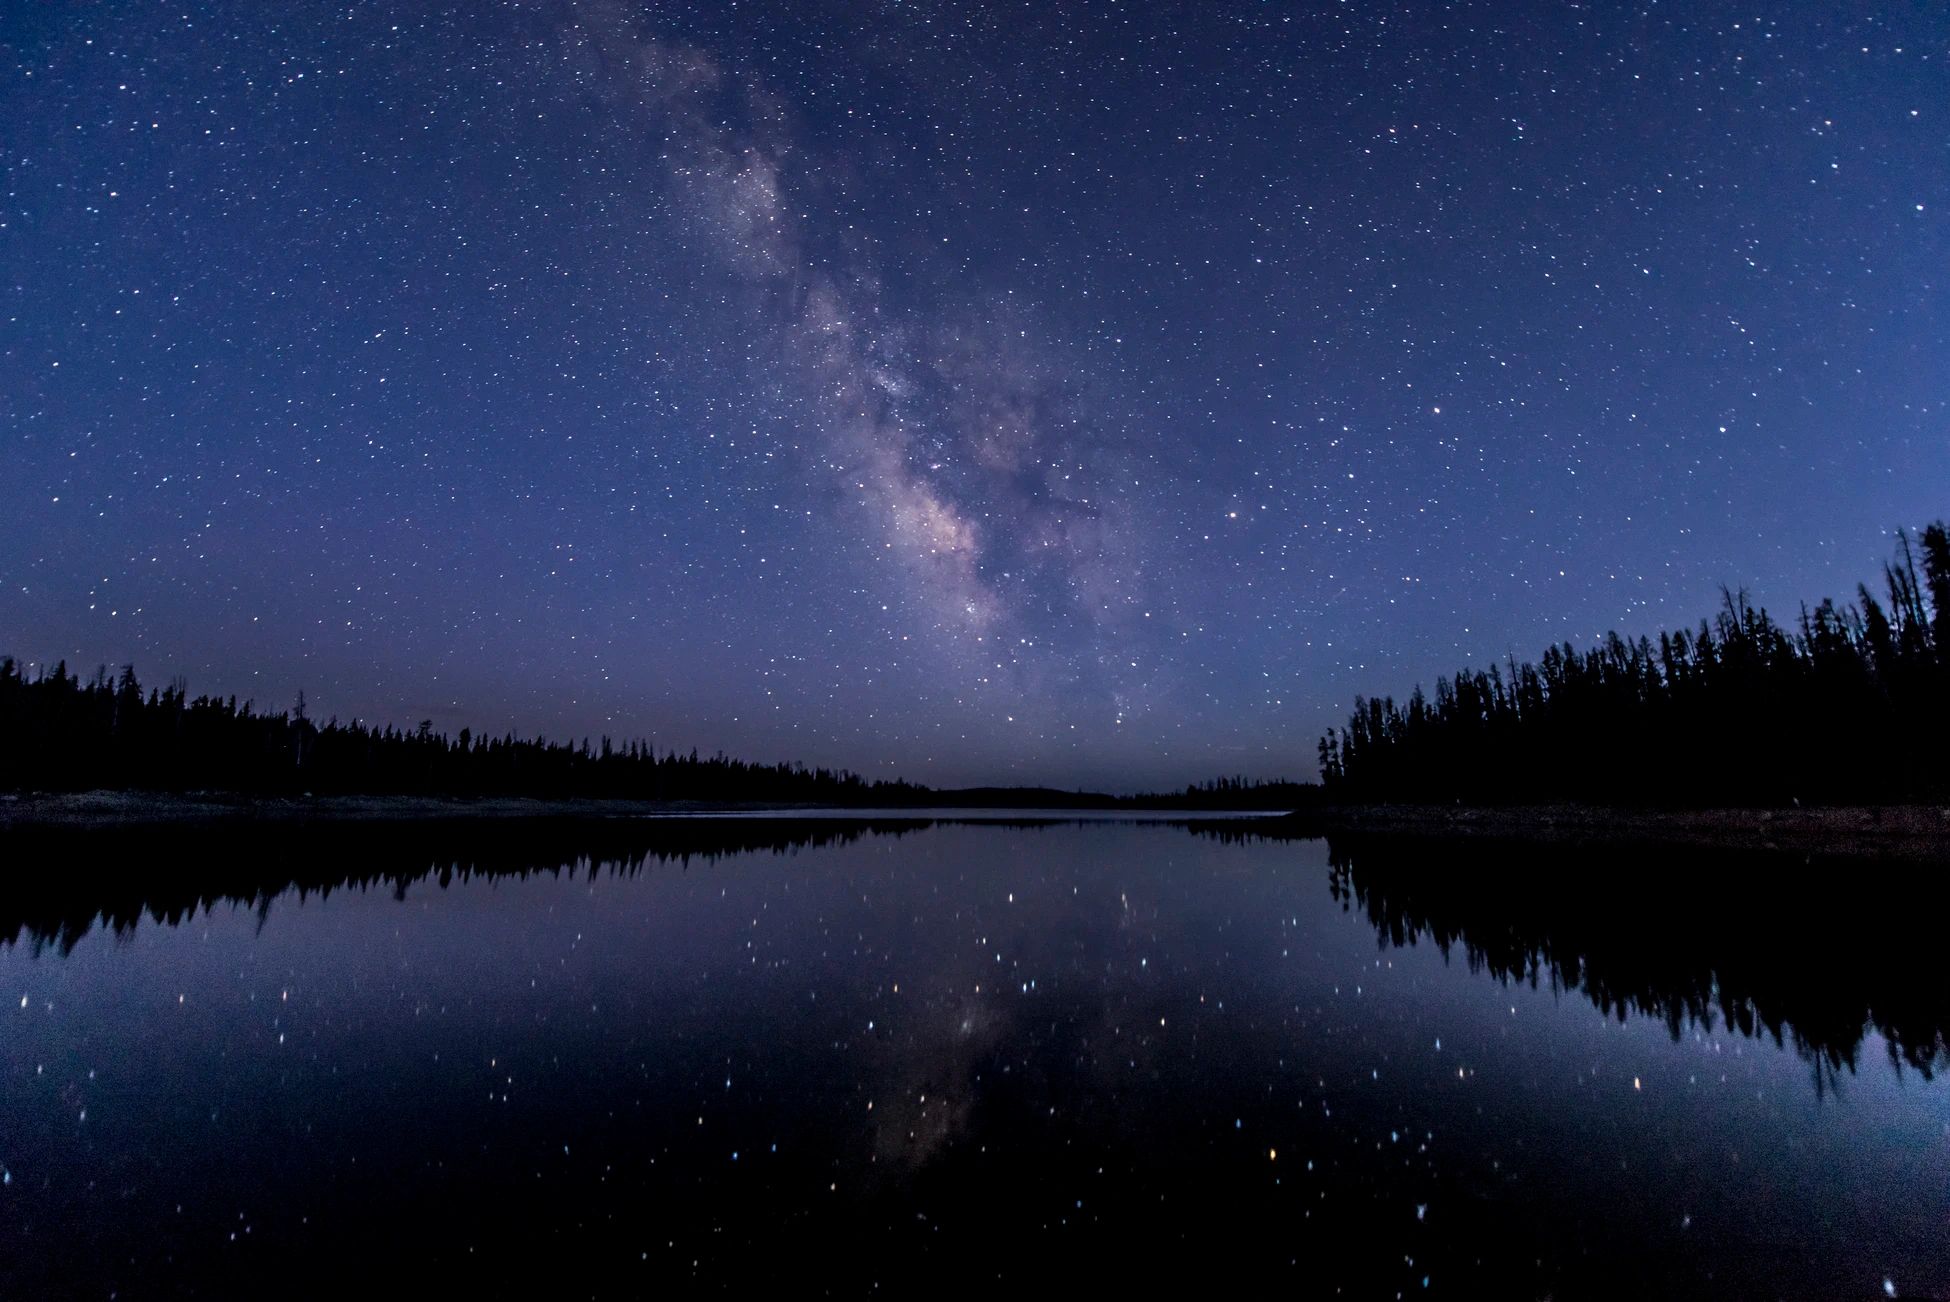 Silhouette of trees near body of water under stars- By Jackson Hendry